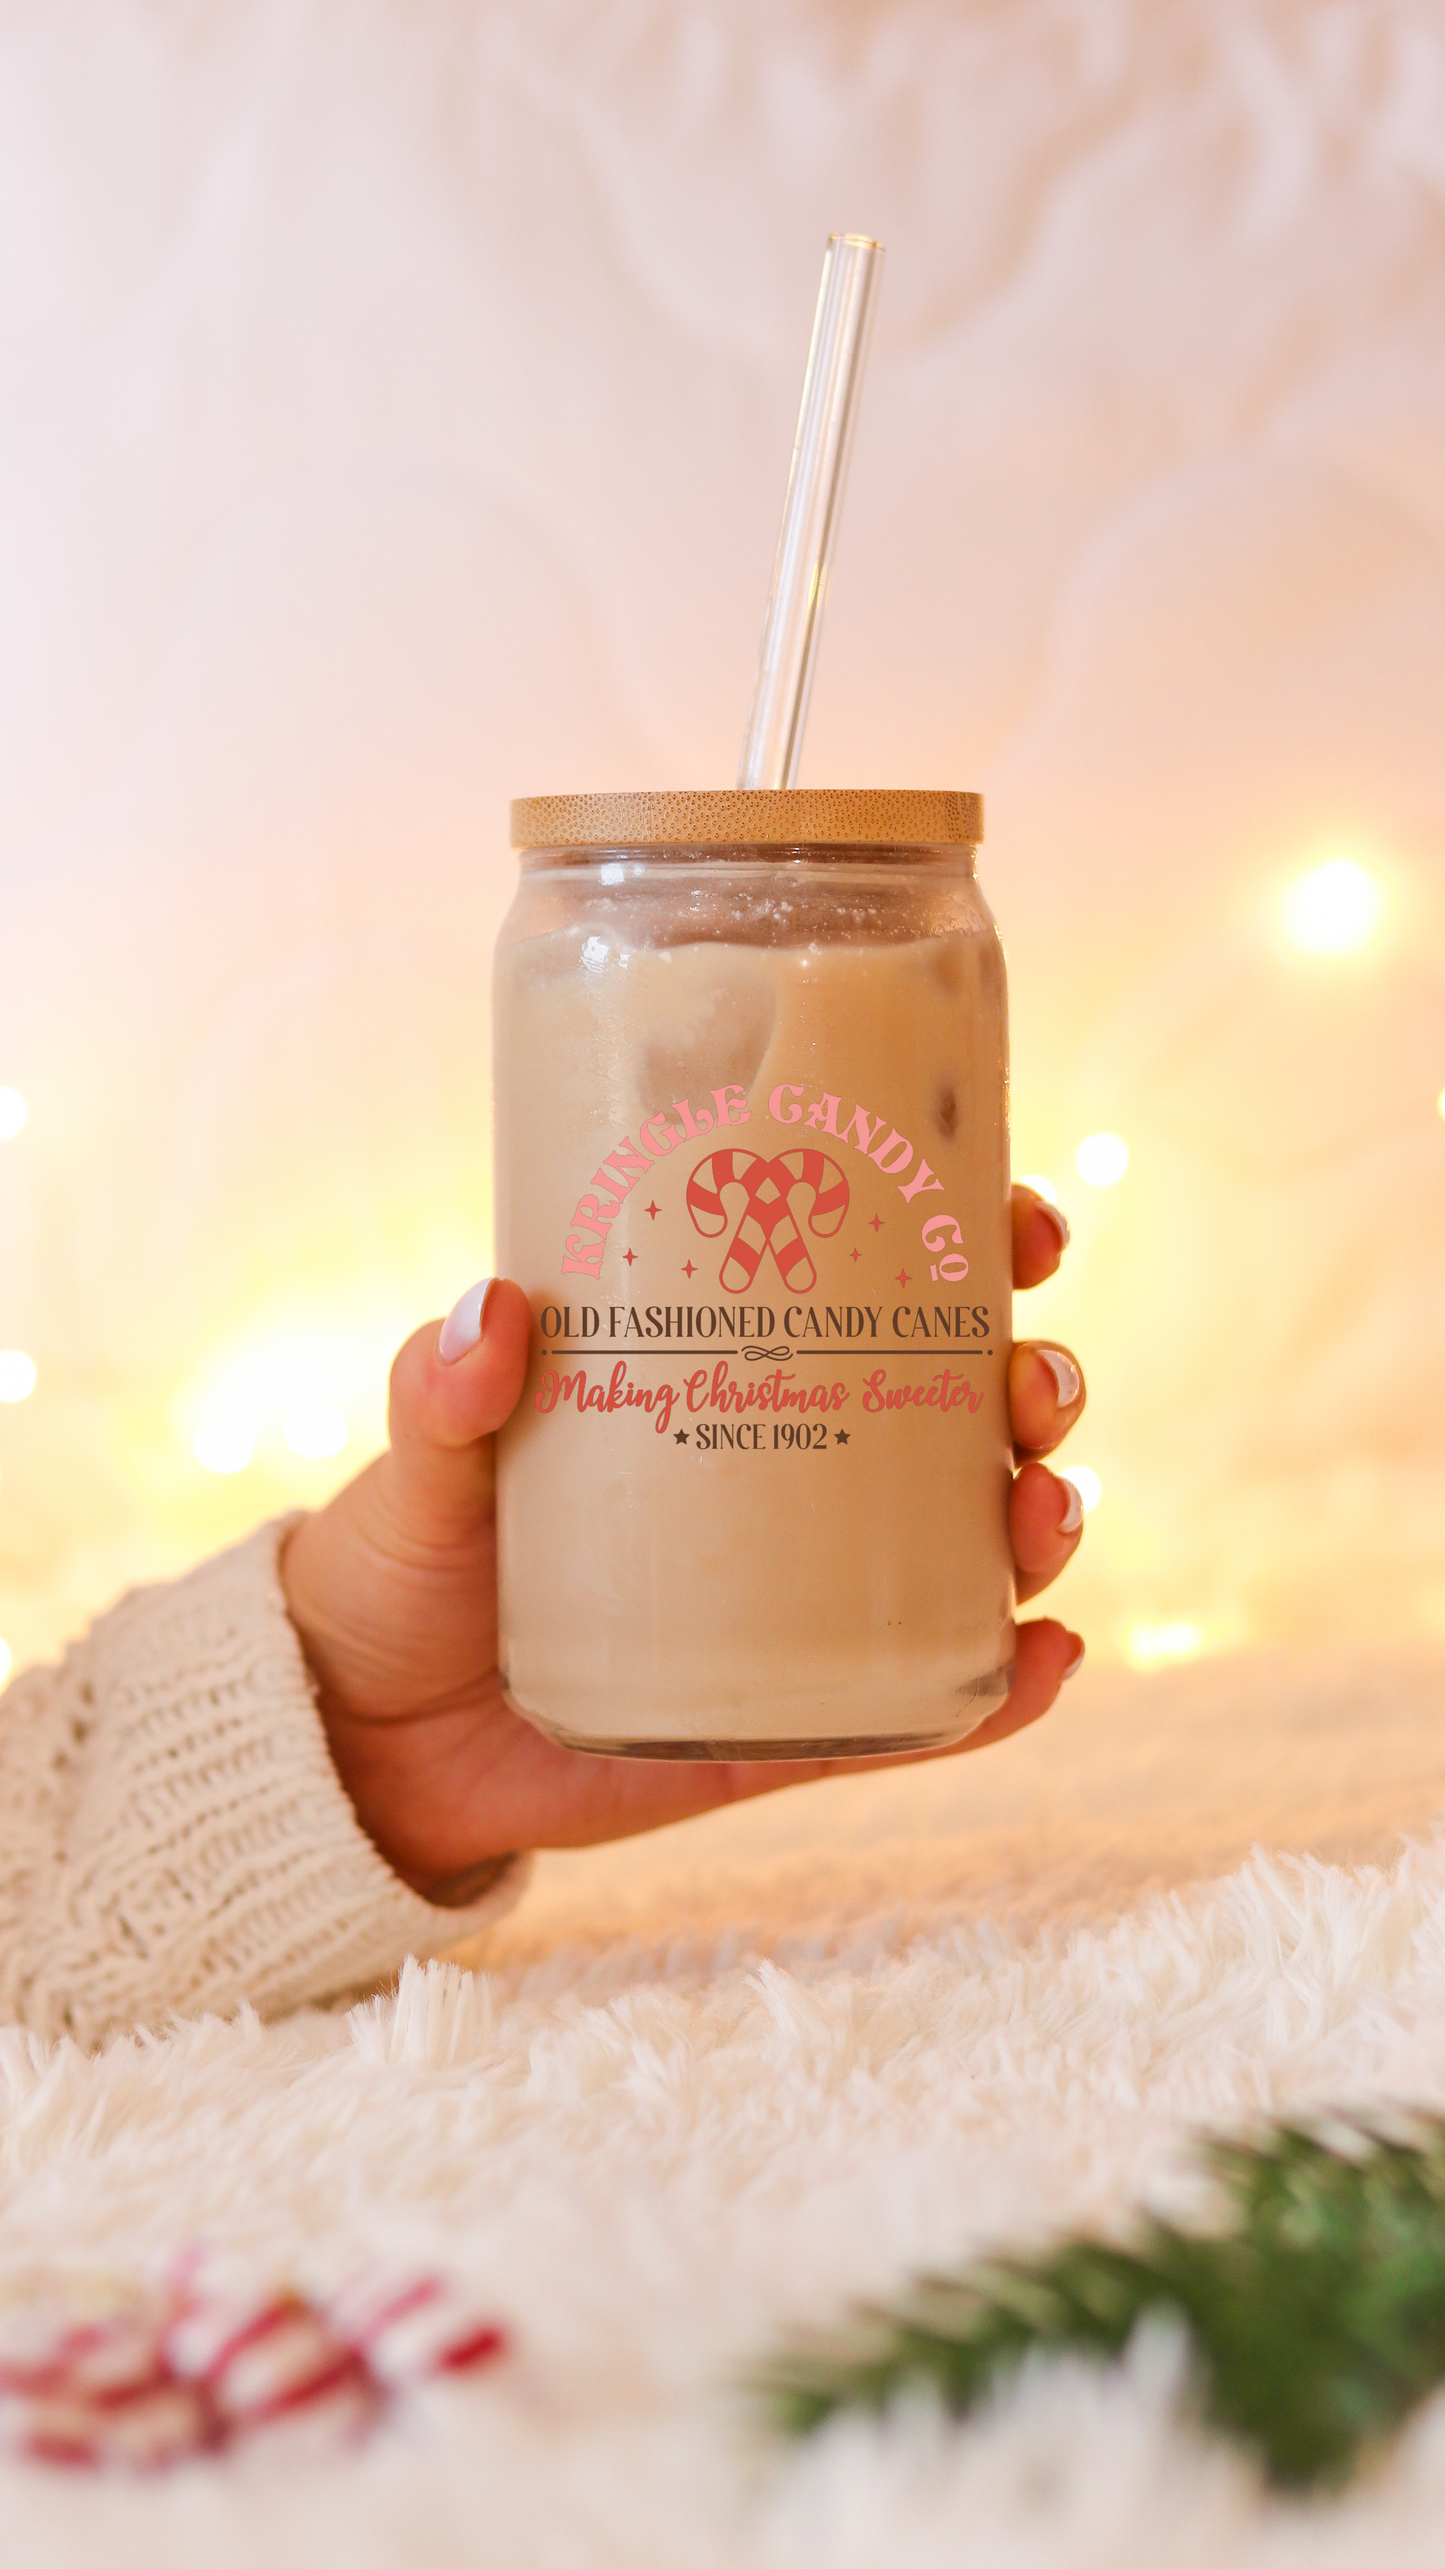 Old Fashioned Candy Canes Iced Coffee Glass